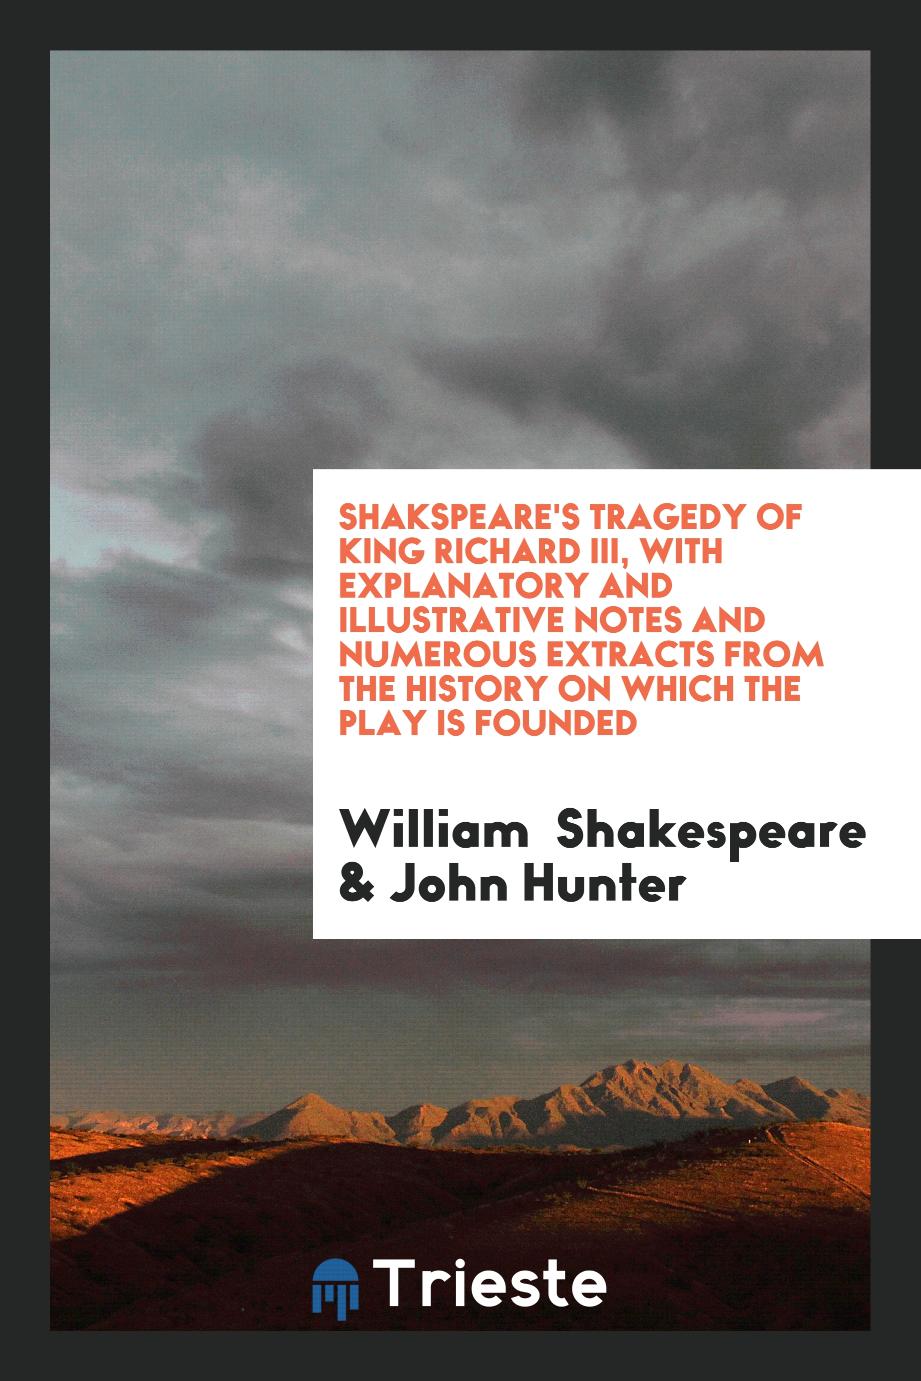 Shakspeare's Tragedy of King Richard III, with Explanatory and Illustrative Notes and Numerous Extracts from the History on Which the Play Is Founded